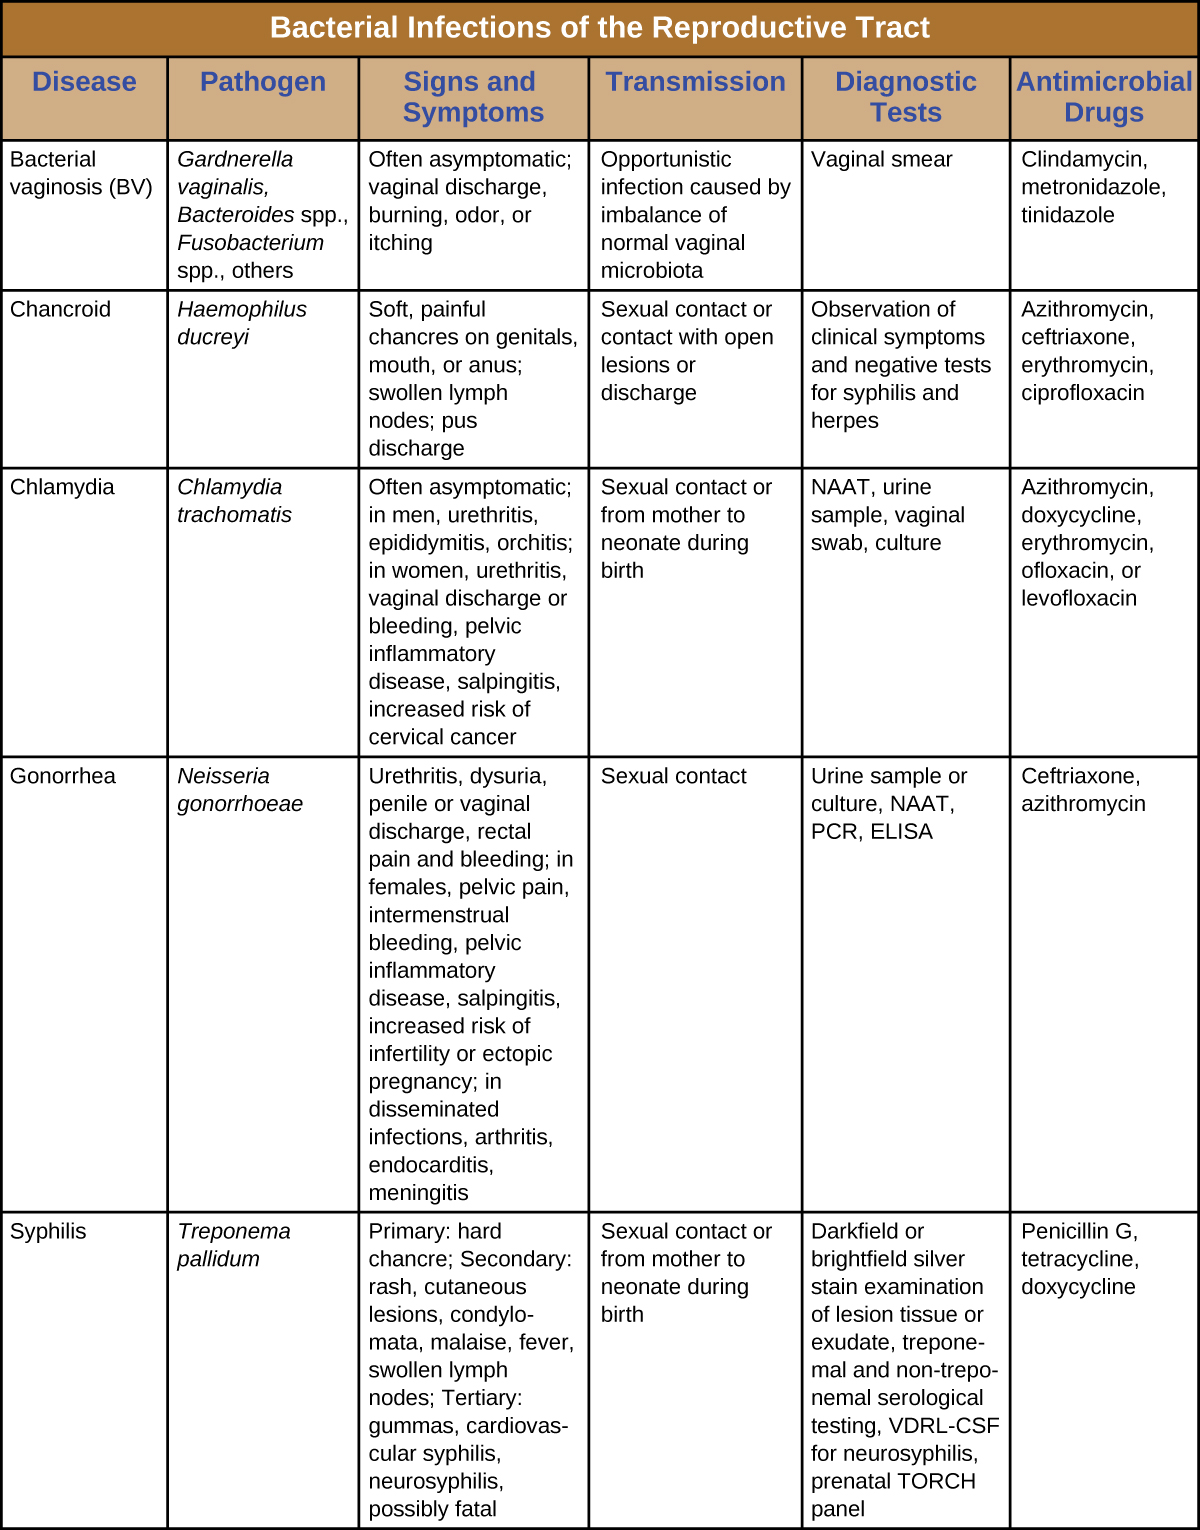 Table title: Bacterial Infections of the Reproductive Tract. Columns: Disease, Pathogen, Signs and Symptoms Transmission, Diagnostic Tests, Antimicrobial Drugs. Disease - Bacterial vaginosis (BV); Gardnerella vaginalis, Bacteroides spp., Fusobacterium spp., others; Often asymptomatic; vaginal discharge, burning, odor, or itching Opportunistic infection caused by imbalance of normal vaginal microbiota; Vaginal smear; Clindamycin, metronidazole, tinidazole. Disease – Chancroid; Haemophilus ducreyi; Soft, painful chancres on genitals, mouth, or anus; swollen lymph nodes; pus discharge; Sexual contact or contact with open lesions or discharge; Observation of clinical symptoms and negative tests for syphilis and herpes; Azithromycin, ceftriaxone, erythromycin, ciprofloxacin. Disease - Chlamydia ; Chlamydia trachomatis; Often asymptomatic; in men, urethritis, epididymitis, orchitis; in women, urethritis, vaginal discharge or bleeding, pelvic inflammatory disease, salpingitis, increased risk of cervical cancer ; Sexual contact or from mother to neonate during birth; NAAT, urine sample, vaginal swab, culture; Azithromycin, doxycycline, erythromycin, ofloxacin, or levofloxacin. Disease – Gonorrhea; Neisseria gonorrhoeae; Urethritis, dysuria, penile or vaginal discharge, rectal pain and bleeding; in females, pelvic pain, intermenstrual bleeding, pelvic inflammatory disease, salpingitis, increased risk of infertility or ectopic pregnancy; in disseminated infections, arthritis, endocarditis, meningitis; Sexual contact ; Urine sample or culture, NAAT, PCR, ELISA; Ceftriaxone, azithromycin. Syphilis; Treponema pallidum Primary: hard chancre; Secondary: rash, cutaneous lesions, condylomata, malaise, fever, swollen lymph nodes; Tertiary: gummas, cardiovascular syphilis, neurosyphilis, possibly fatal; Sexual contact or from mother to neonate during birth; Darkfield or brightfield silver stain examination of lesion tissue or exudate, treponemal and non-treponemal serological testing, VDRL-CSF for neurosyphilis, prenatal TORCH panel; Penicillin G, tetracycline, doxycycline.